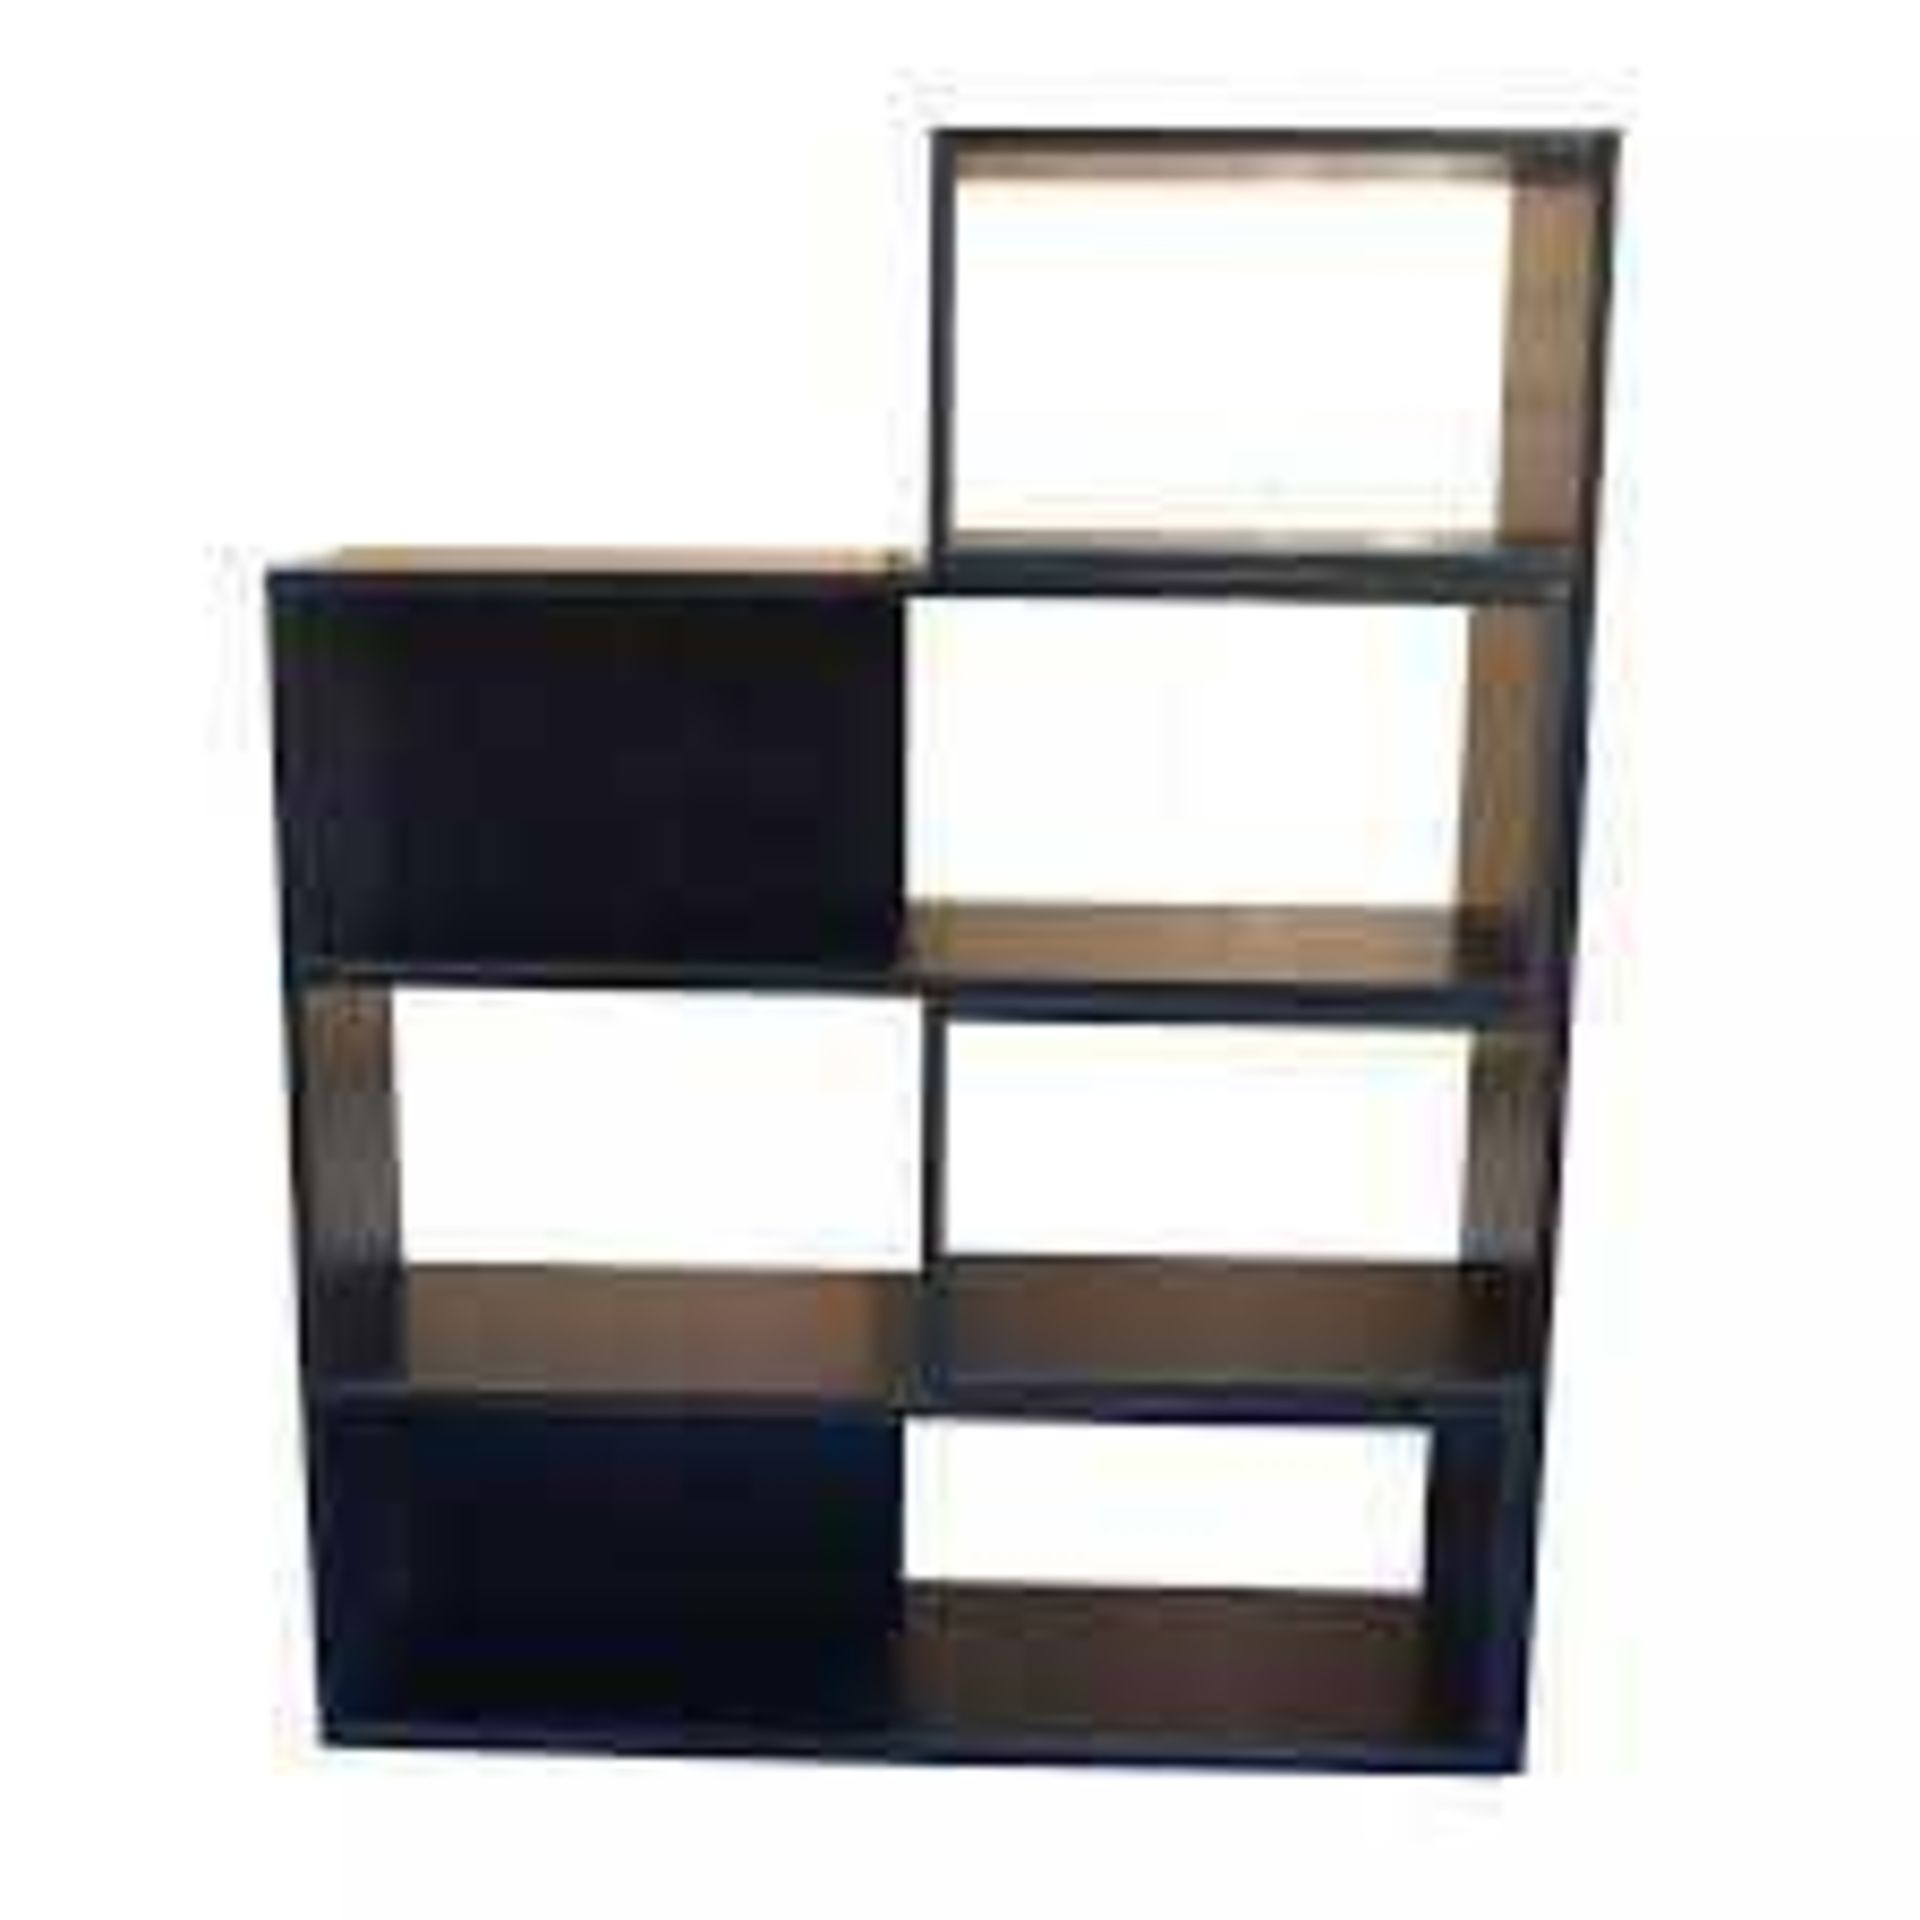 RRP £600 Sourced From Debenhams Brand New Boxed Fenton Adjustable Shelving Unit In Black - Image 2 of 2